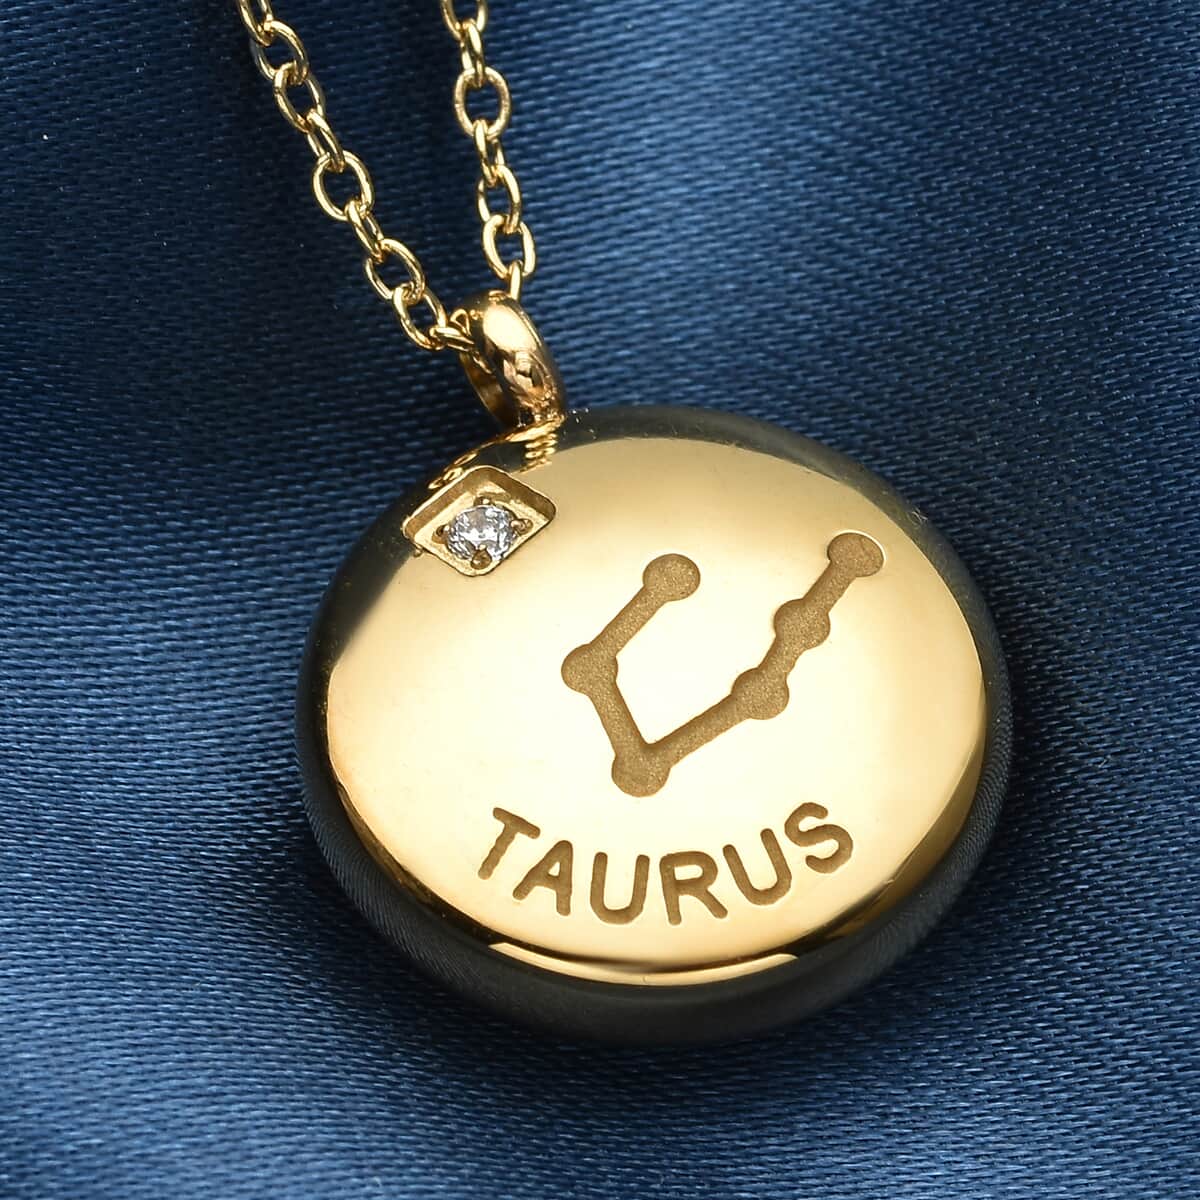 Taurus Zodiac Jewelry Gift Box with Austrian Crystal Constellation Necklace 20 Inches in ION Plated YG Stainless Steel image number 2